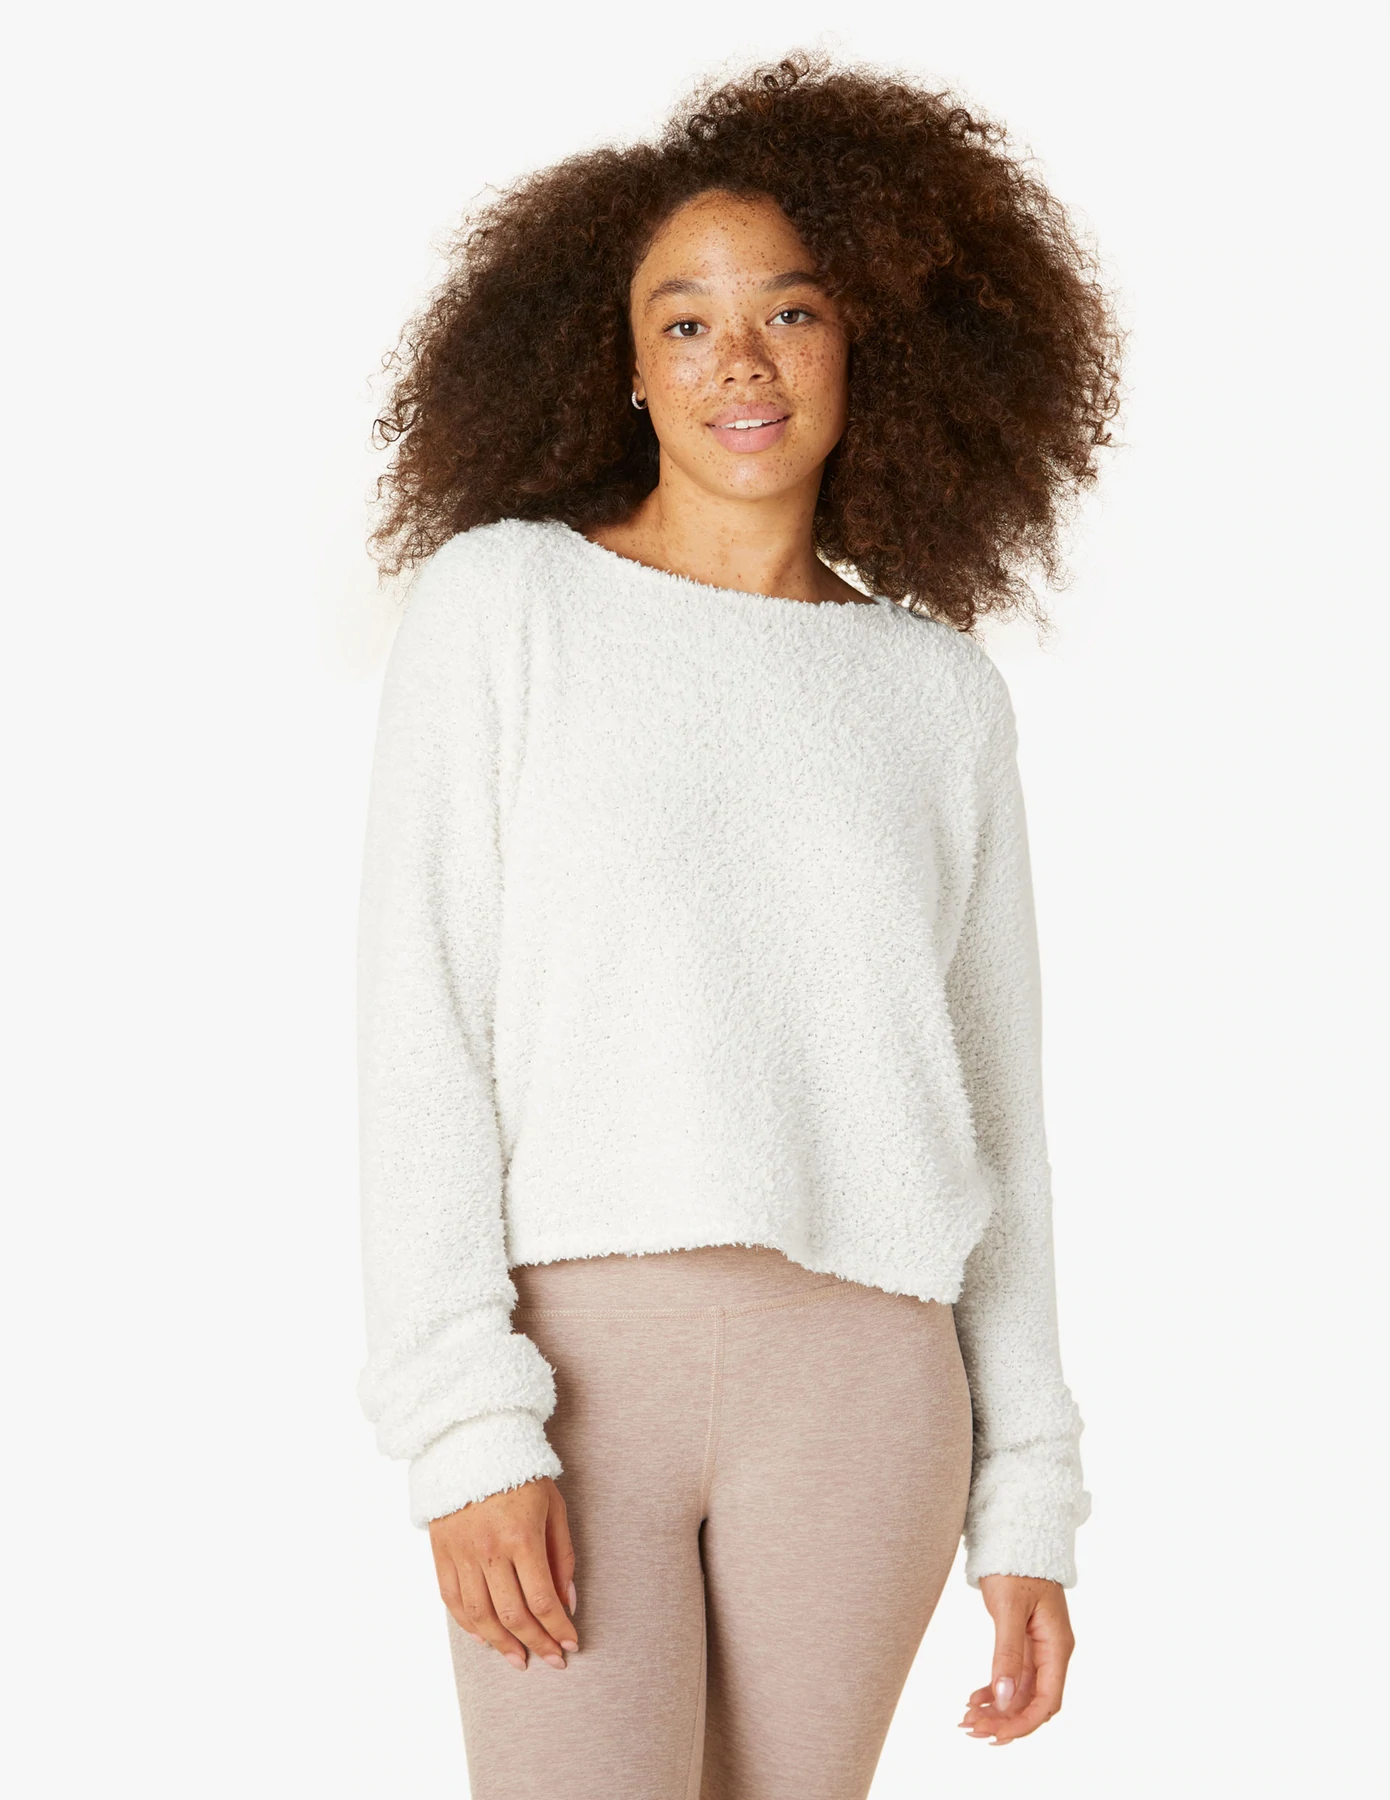 jenseits des Yoga-Pullovers